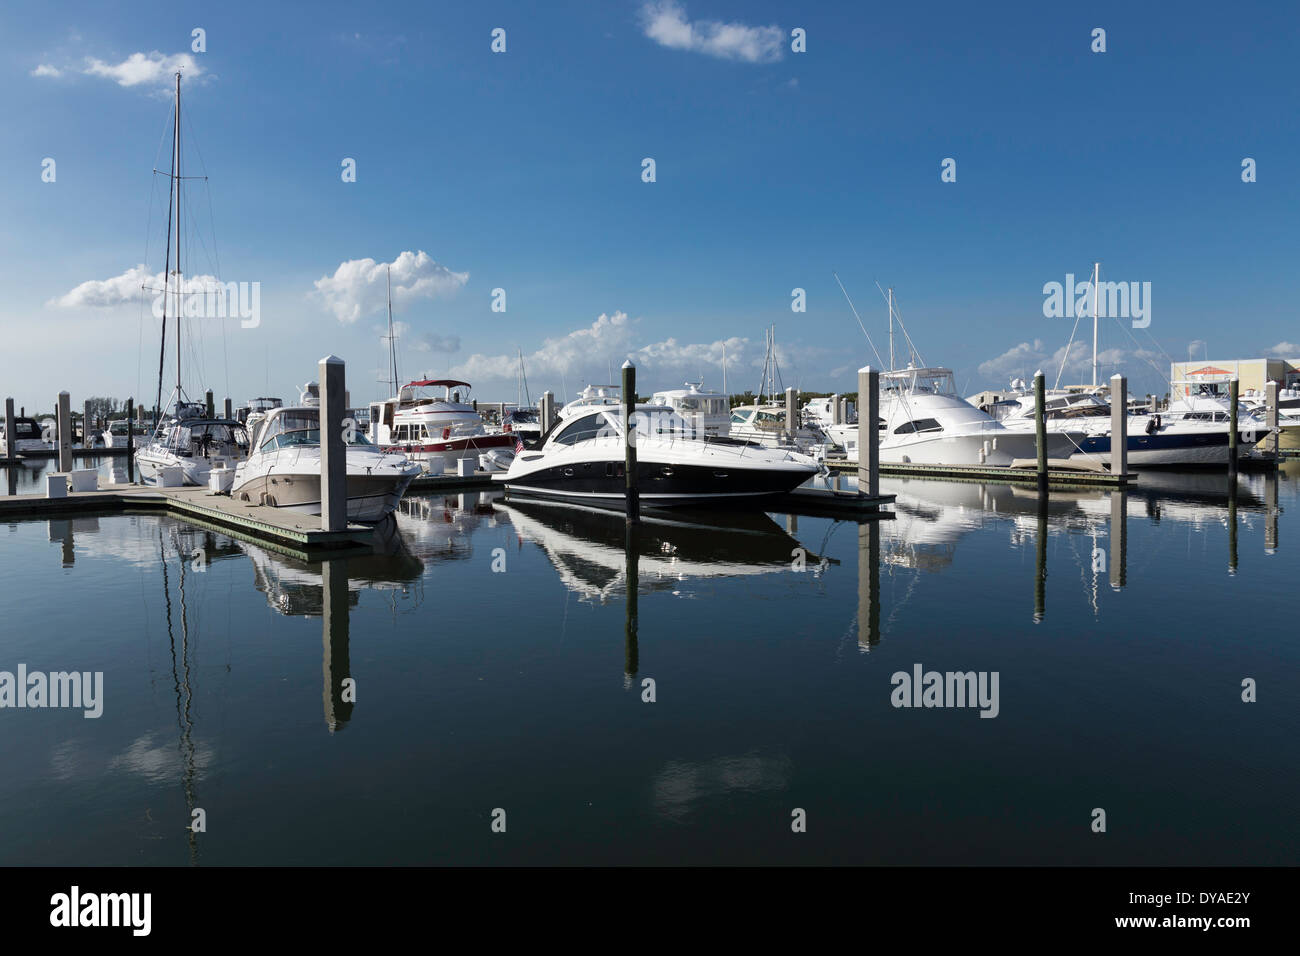 The National Hotel Yacht Club Marina, Tampa, FL, USA Banque D'Images